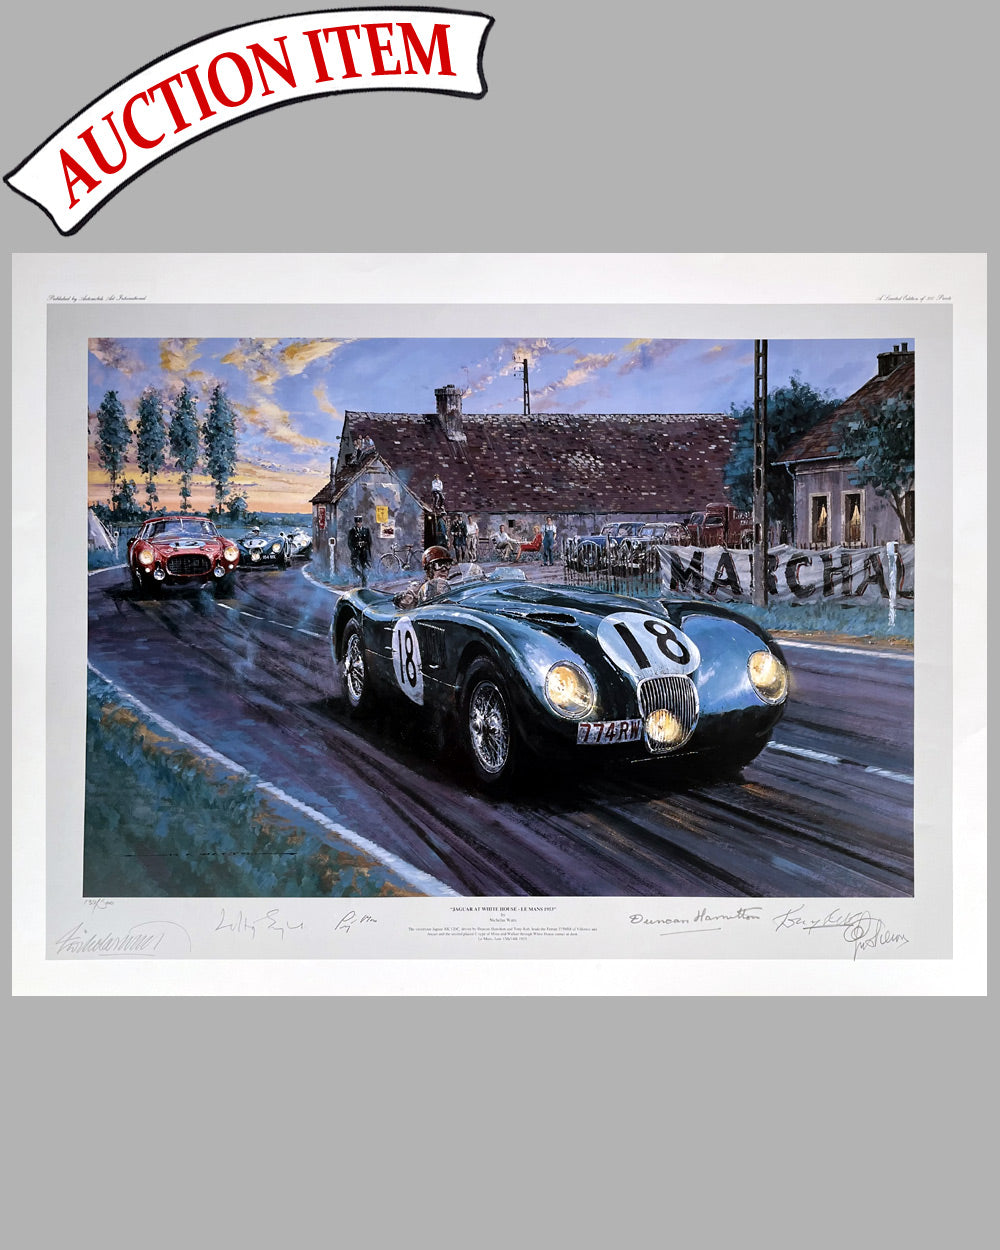 Jaguar at White House Le Mans 1953 print by Nicholas Watts, autographed by 4 drivers and the team manager